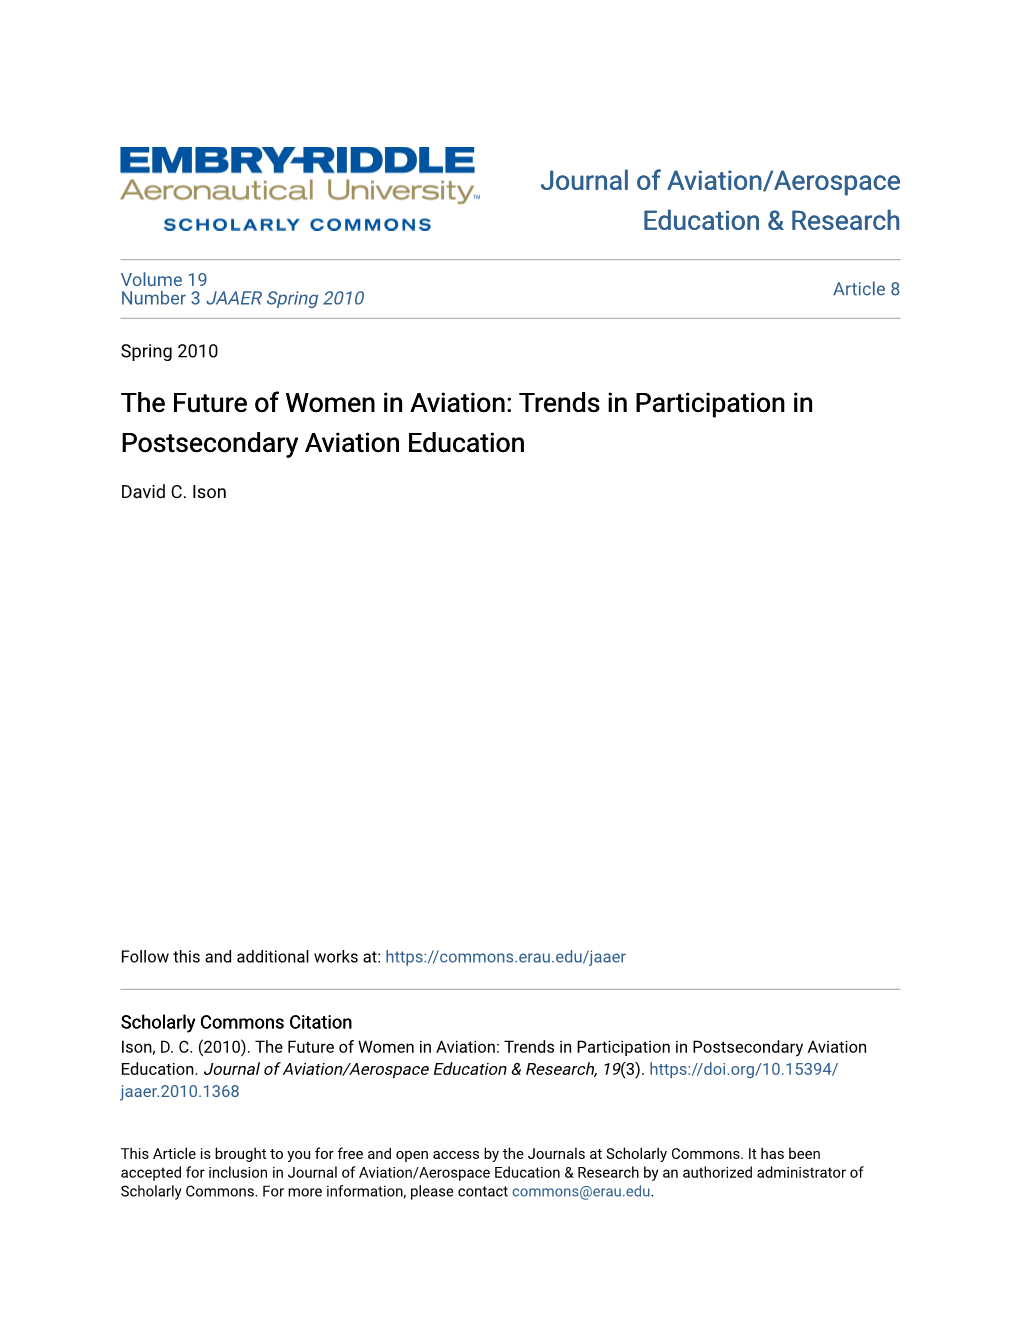 The Future of Women in Aviation: Trends in Participation in Postsecondary Aviation Education